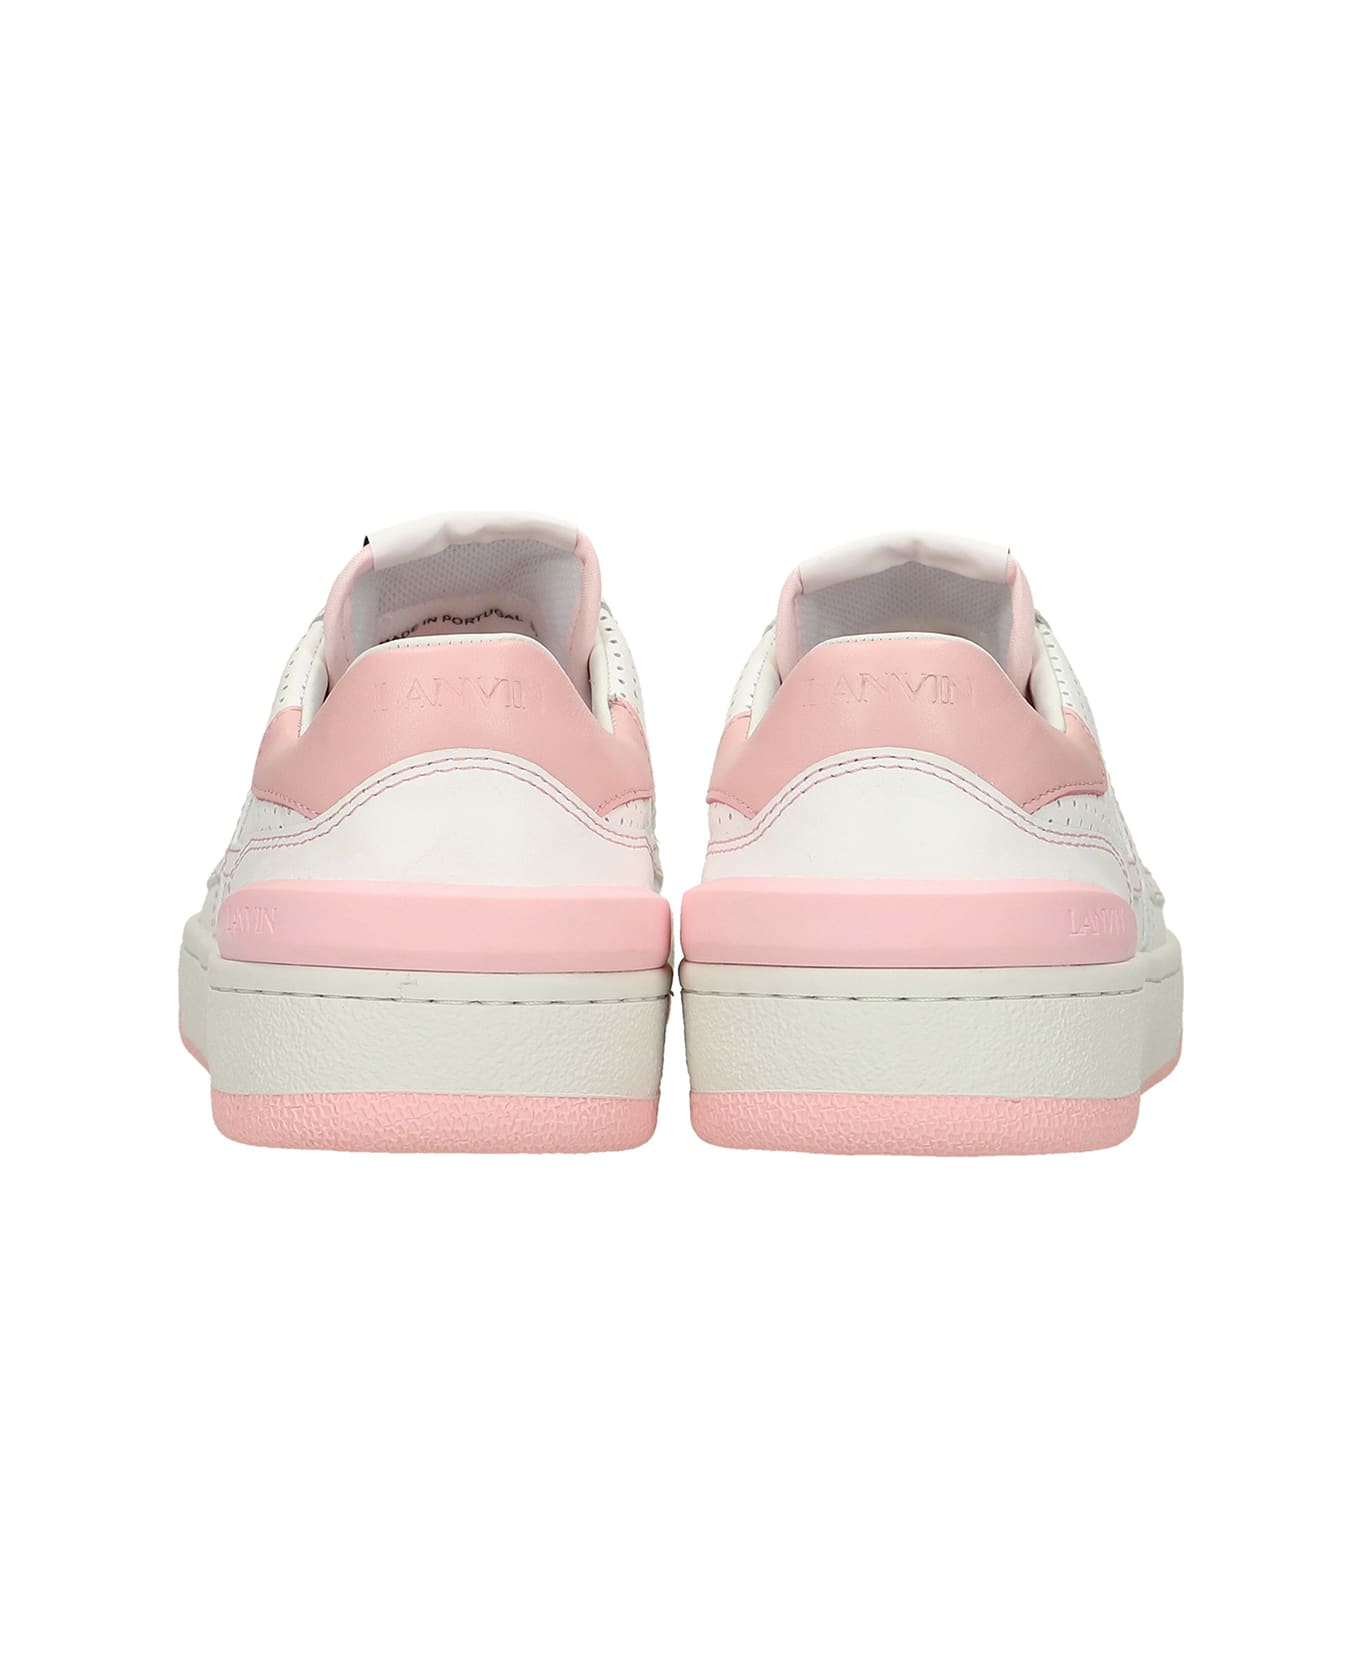 Lanvin Clay  Sneakers In White Leather - white